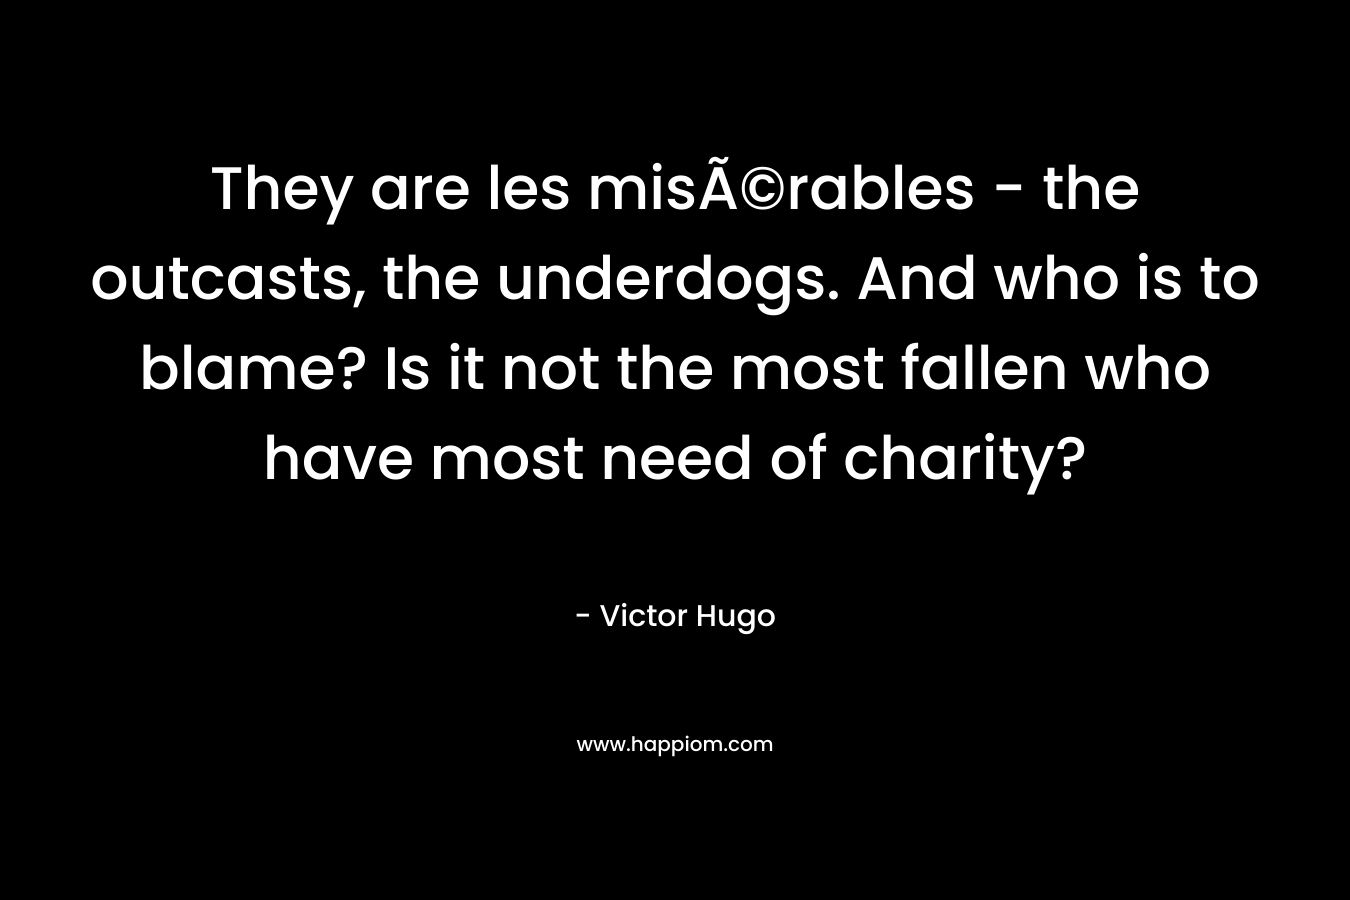 They are les misÃ©rables - the outcasts, the underdogs. And who is to blame? Is it not the most fallen who have most need of charity?